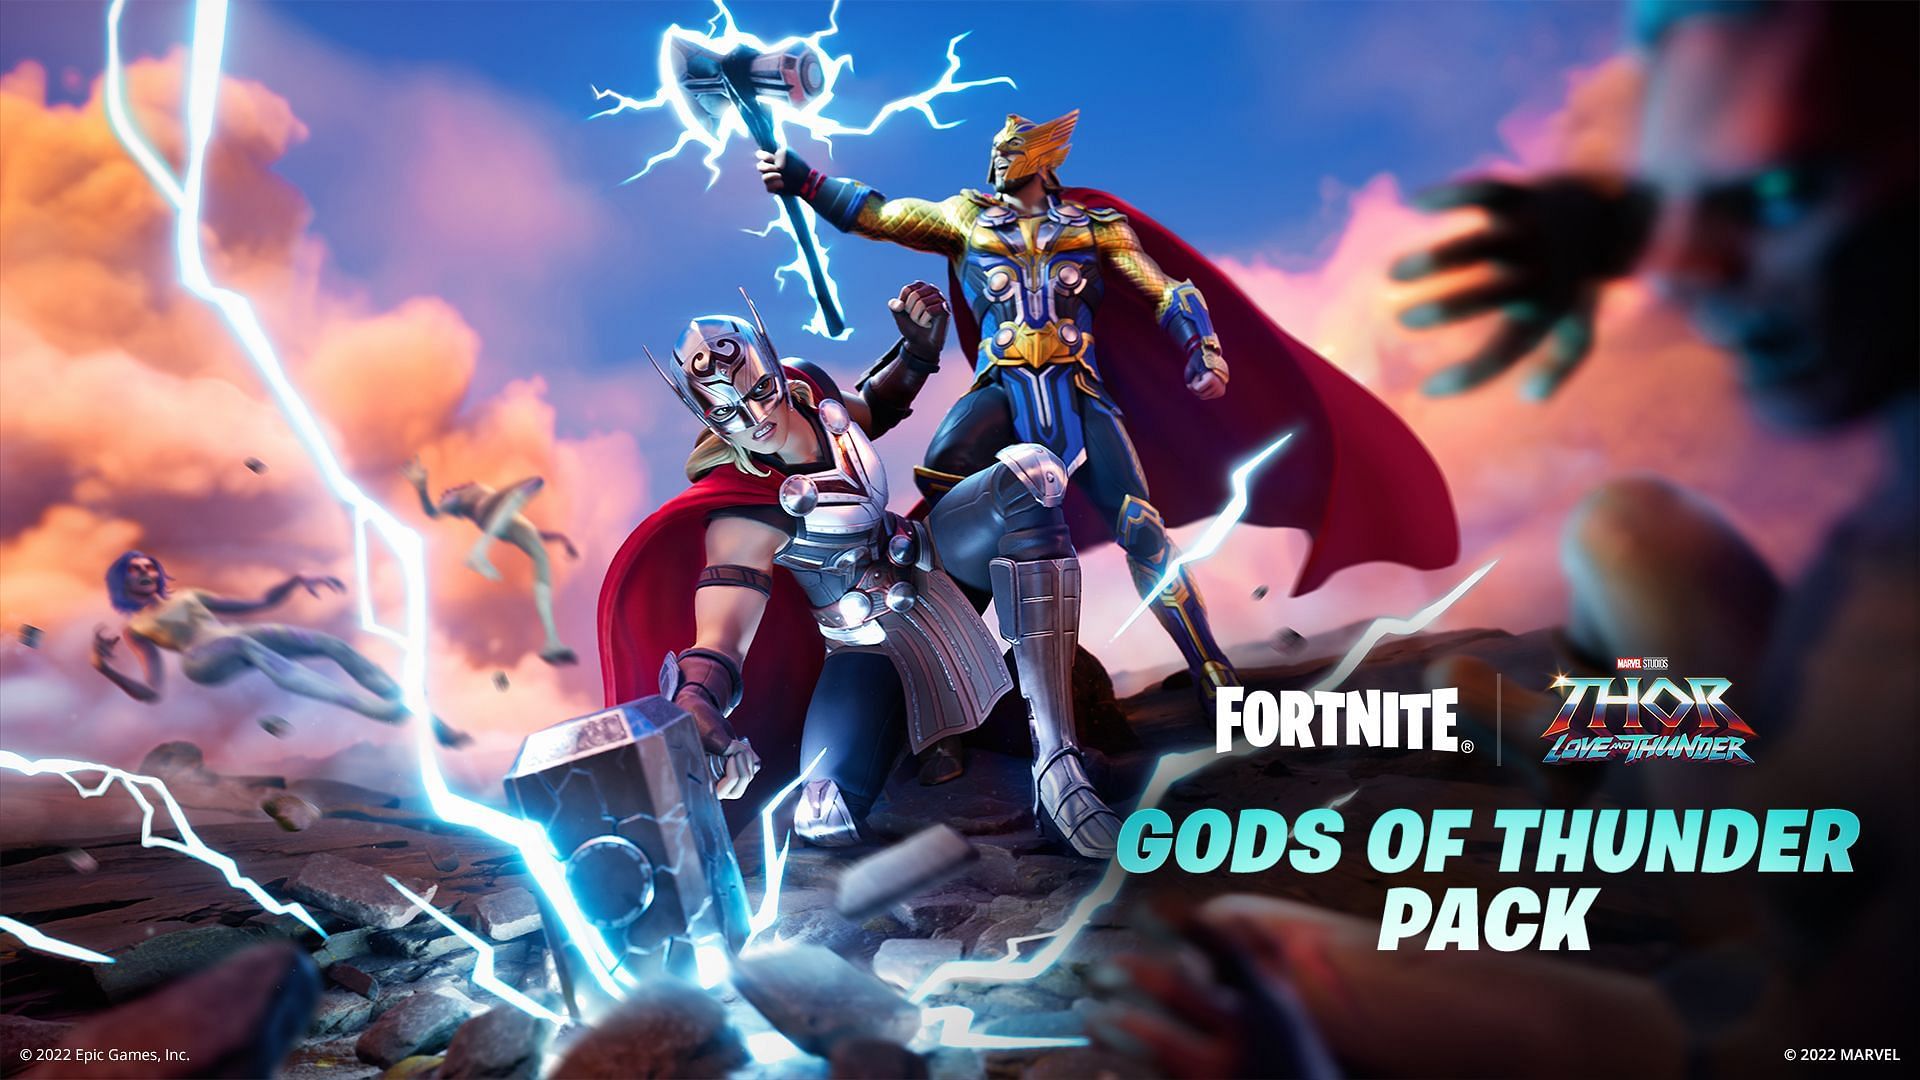 Only a few worthy characters can wield Mjolnir and Stormbreaker in Fortnite Battle Royale (Image via Epic Games)